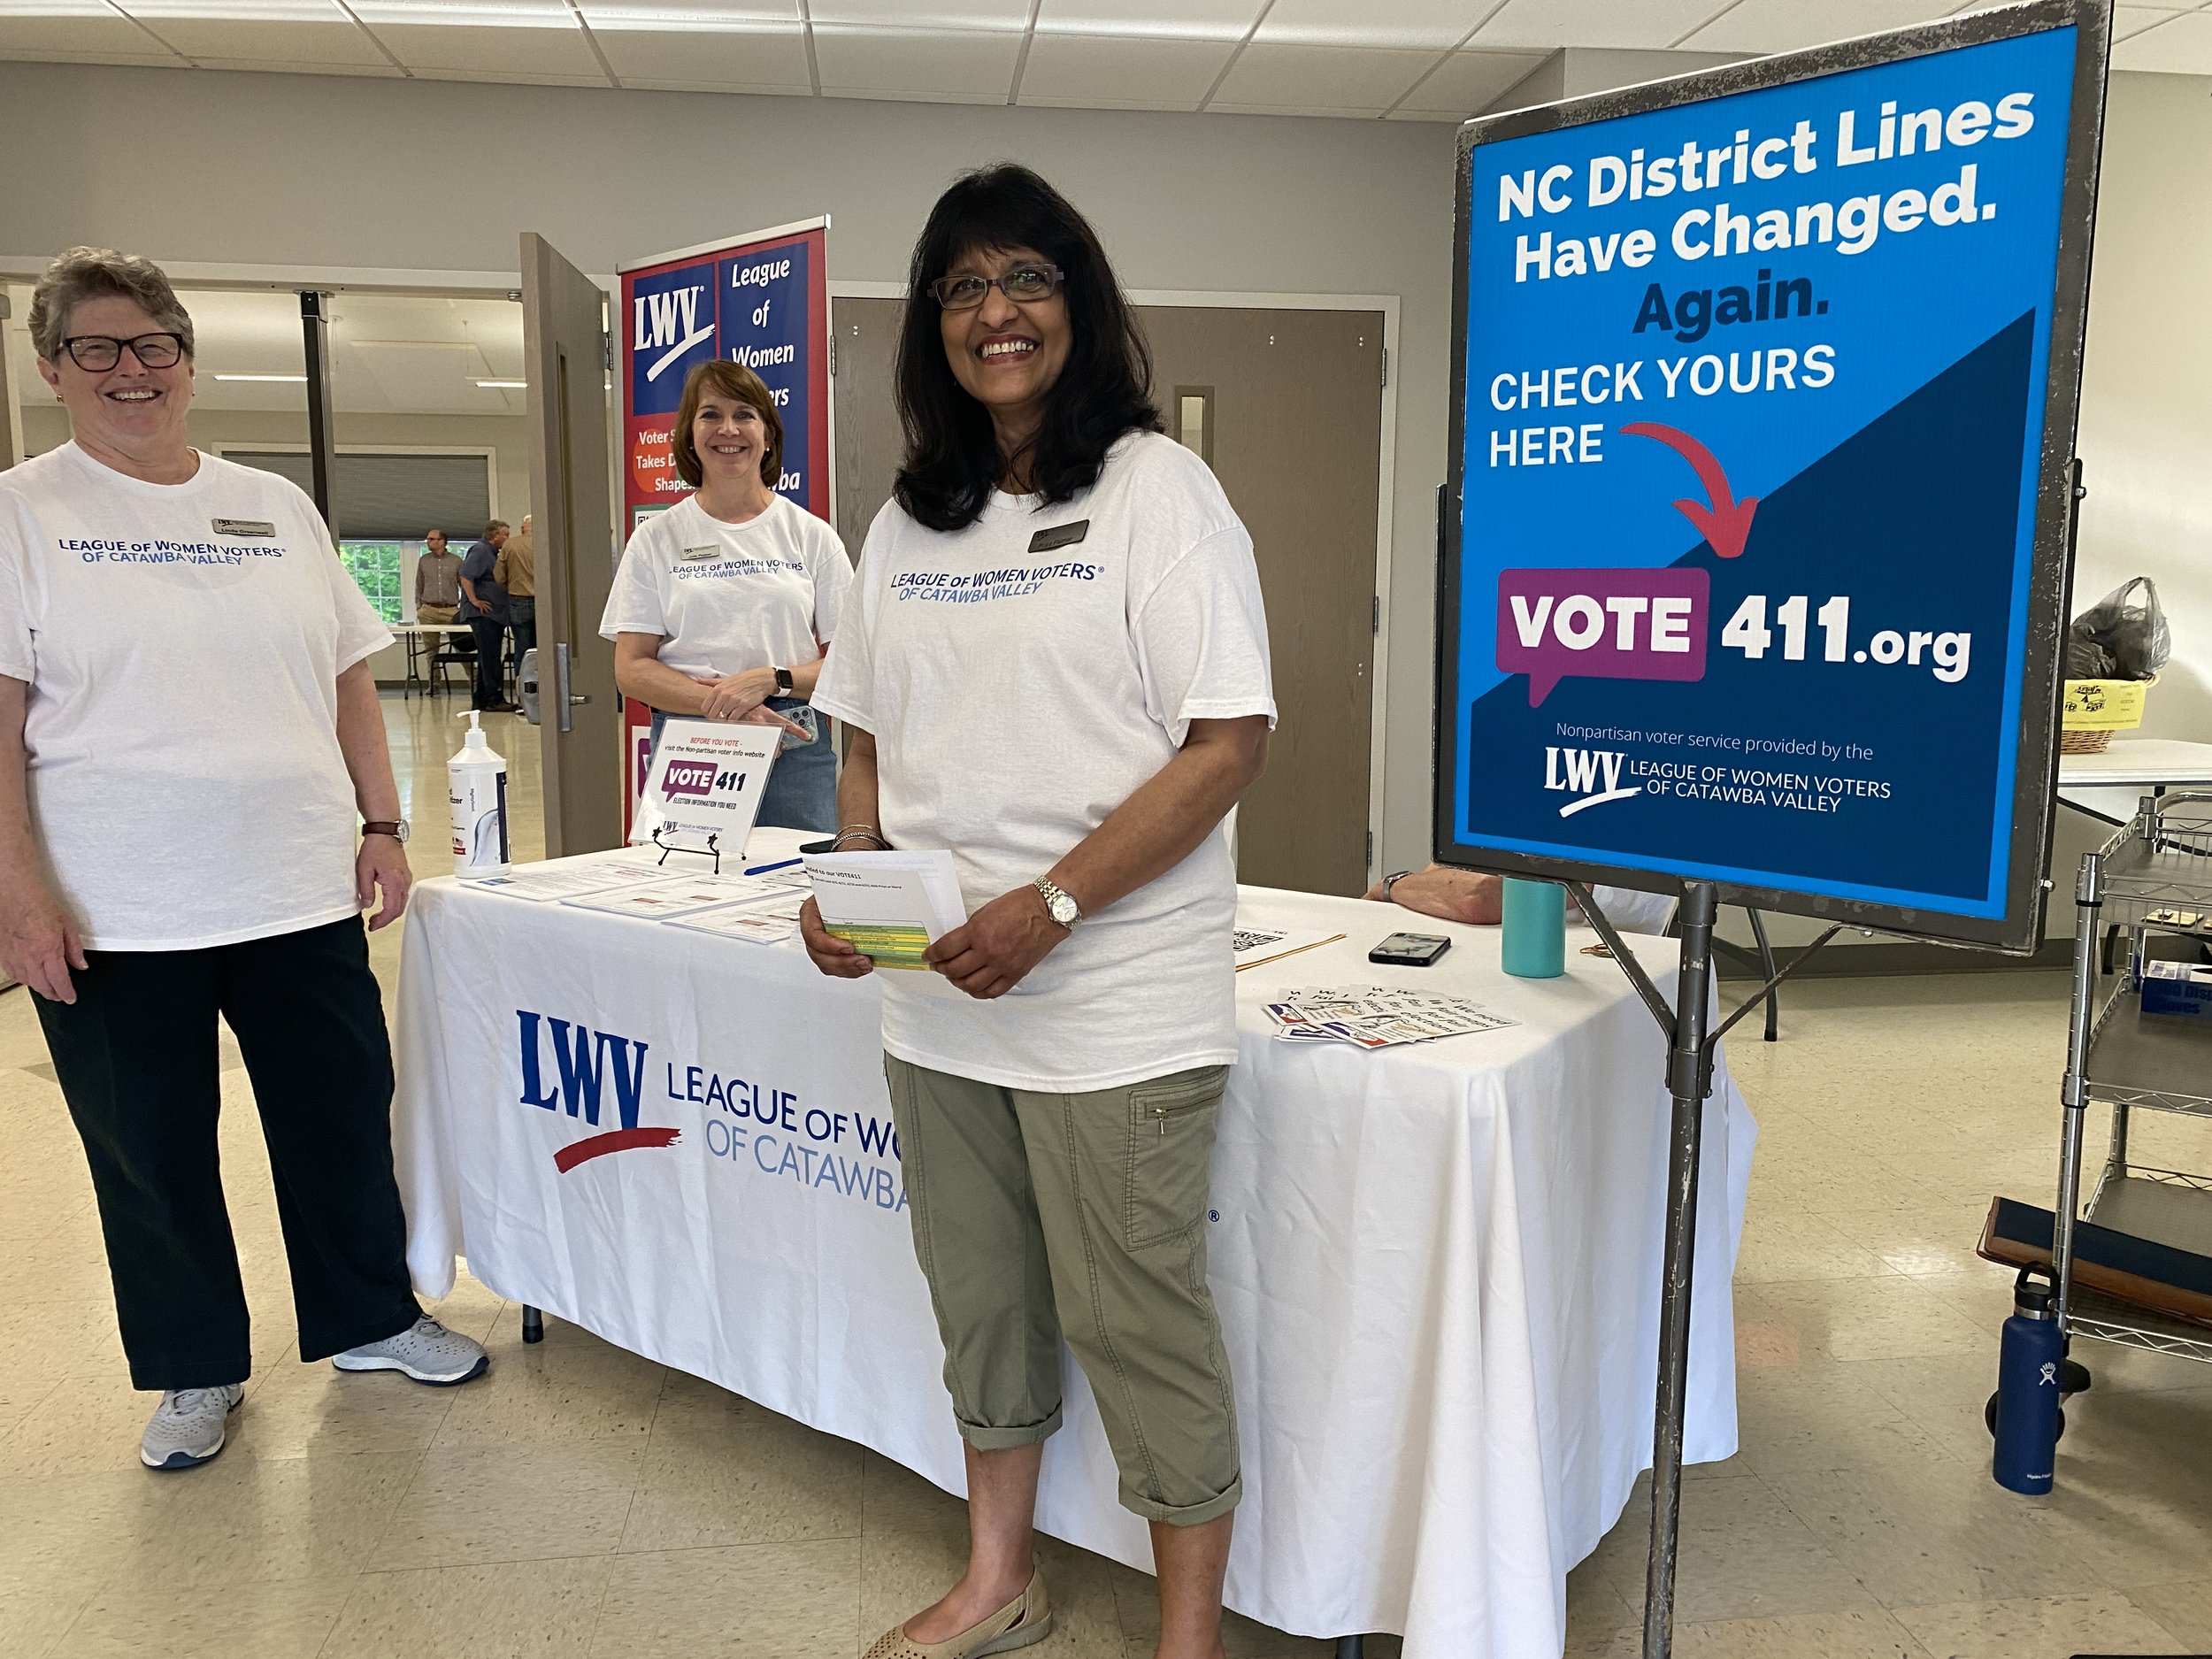 Part of the LWVCV welcoming crew